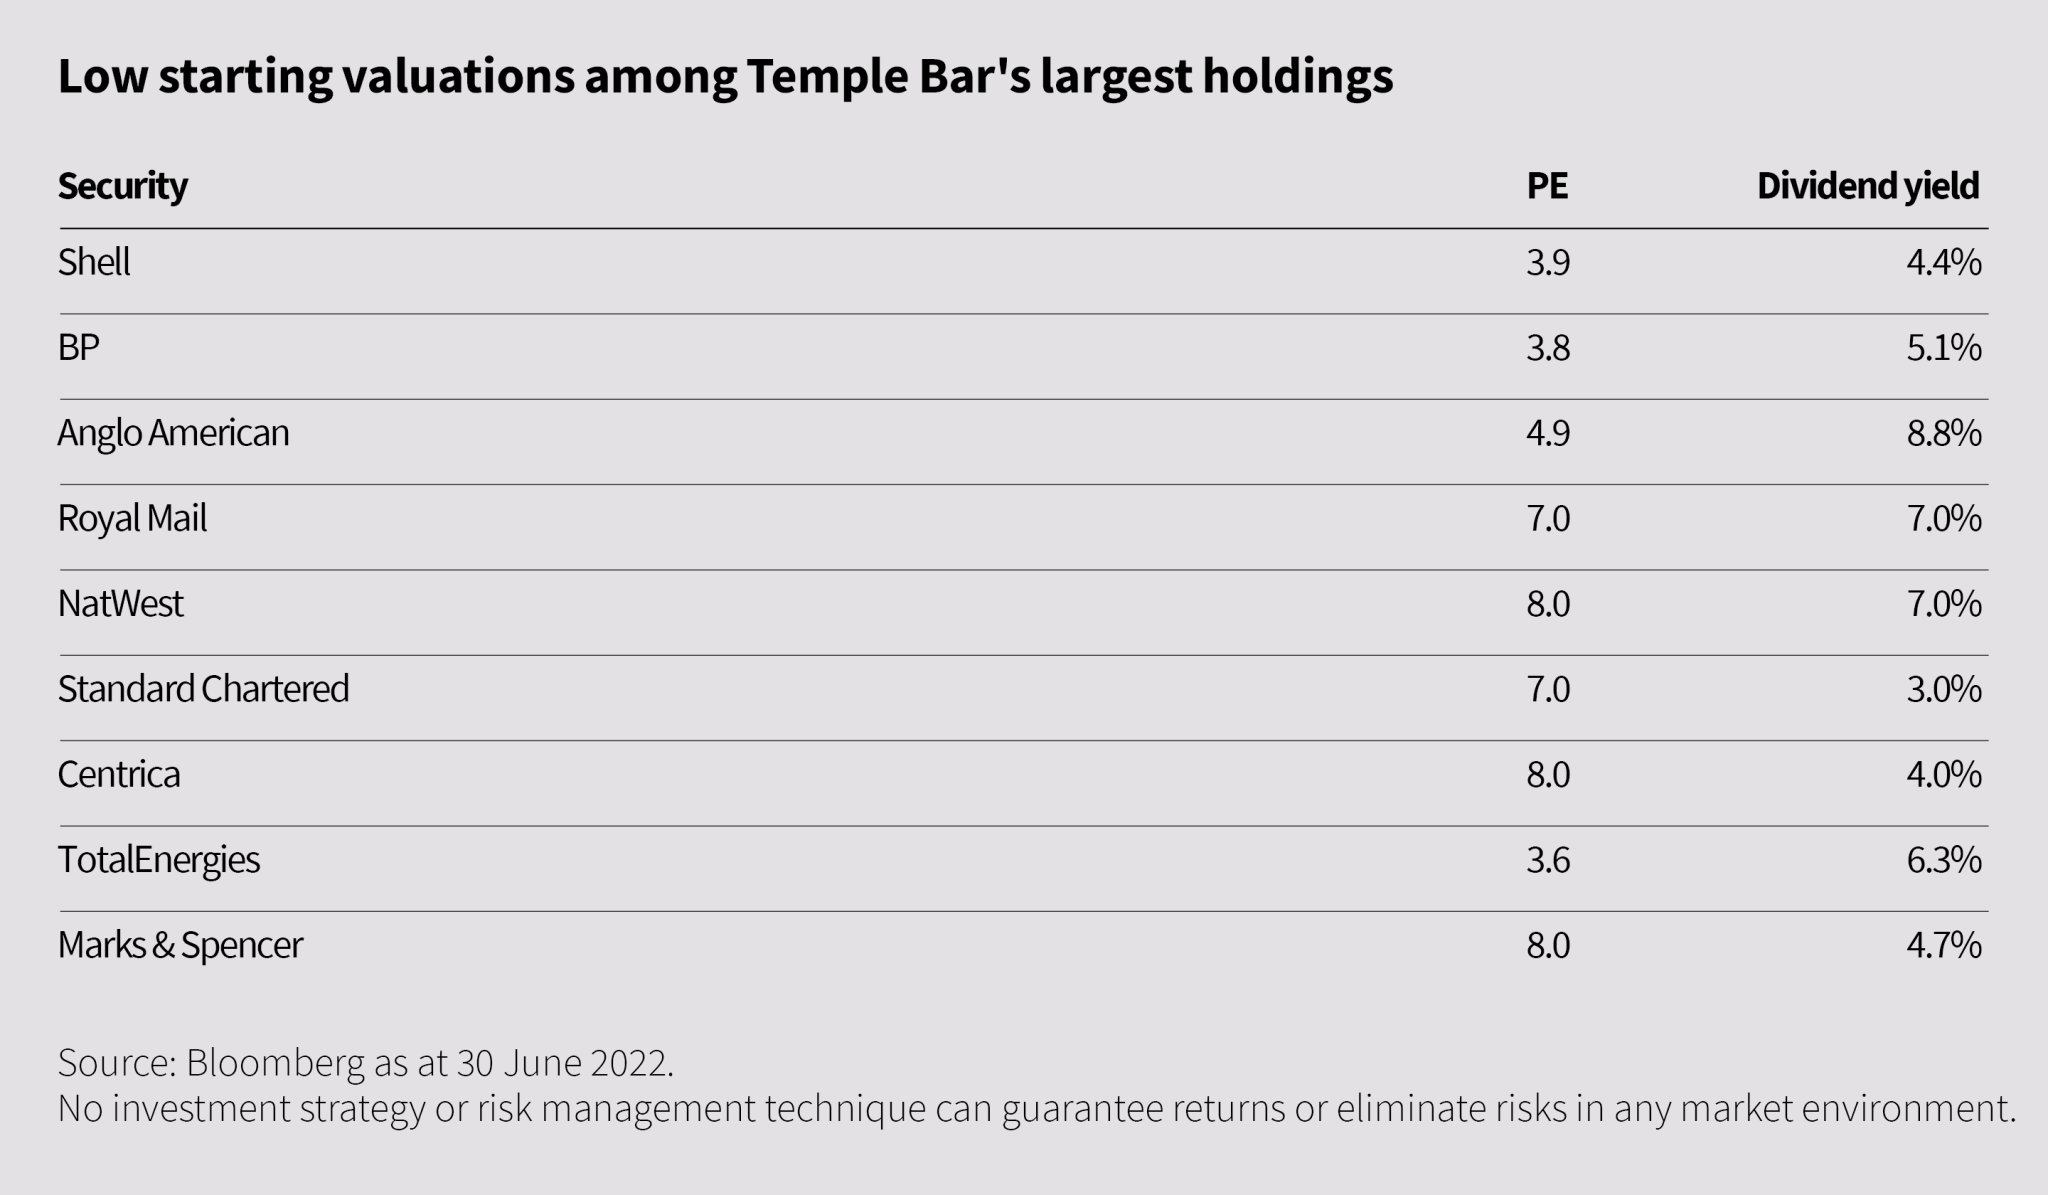 Low starting valuations among Temple Bar's largest holdings